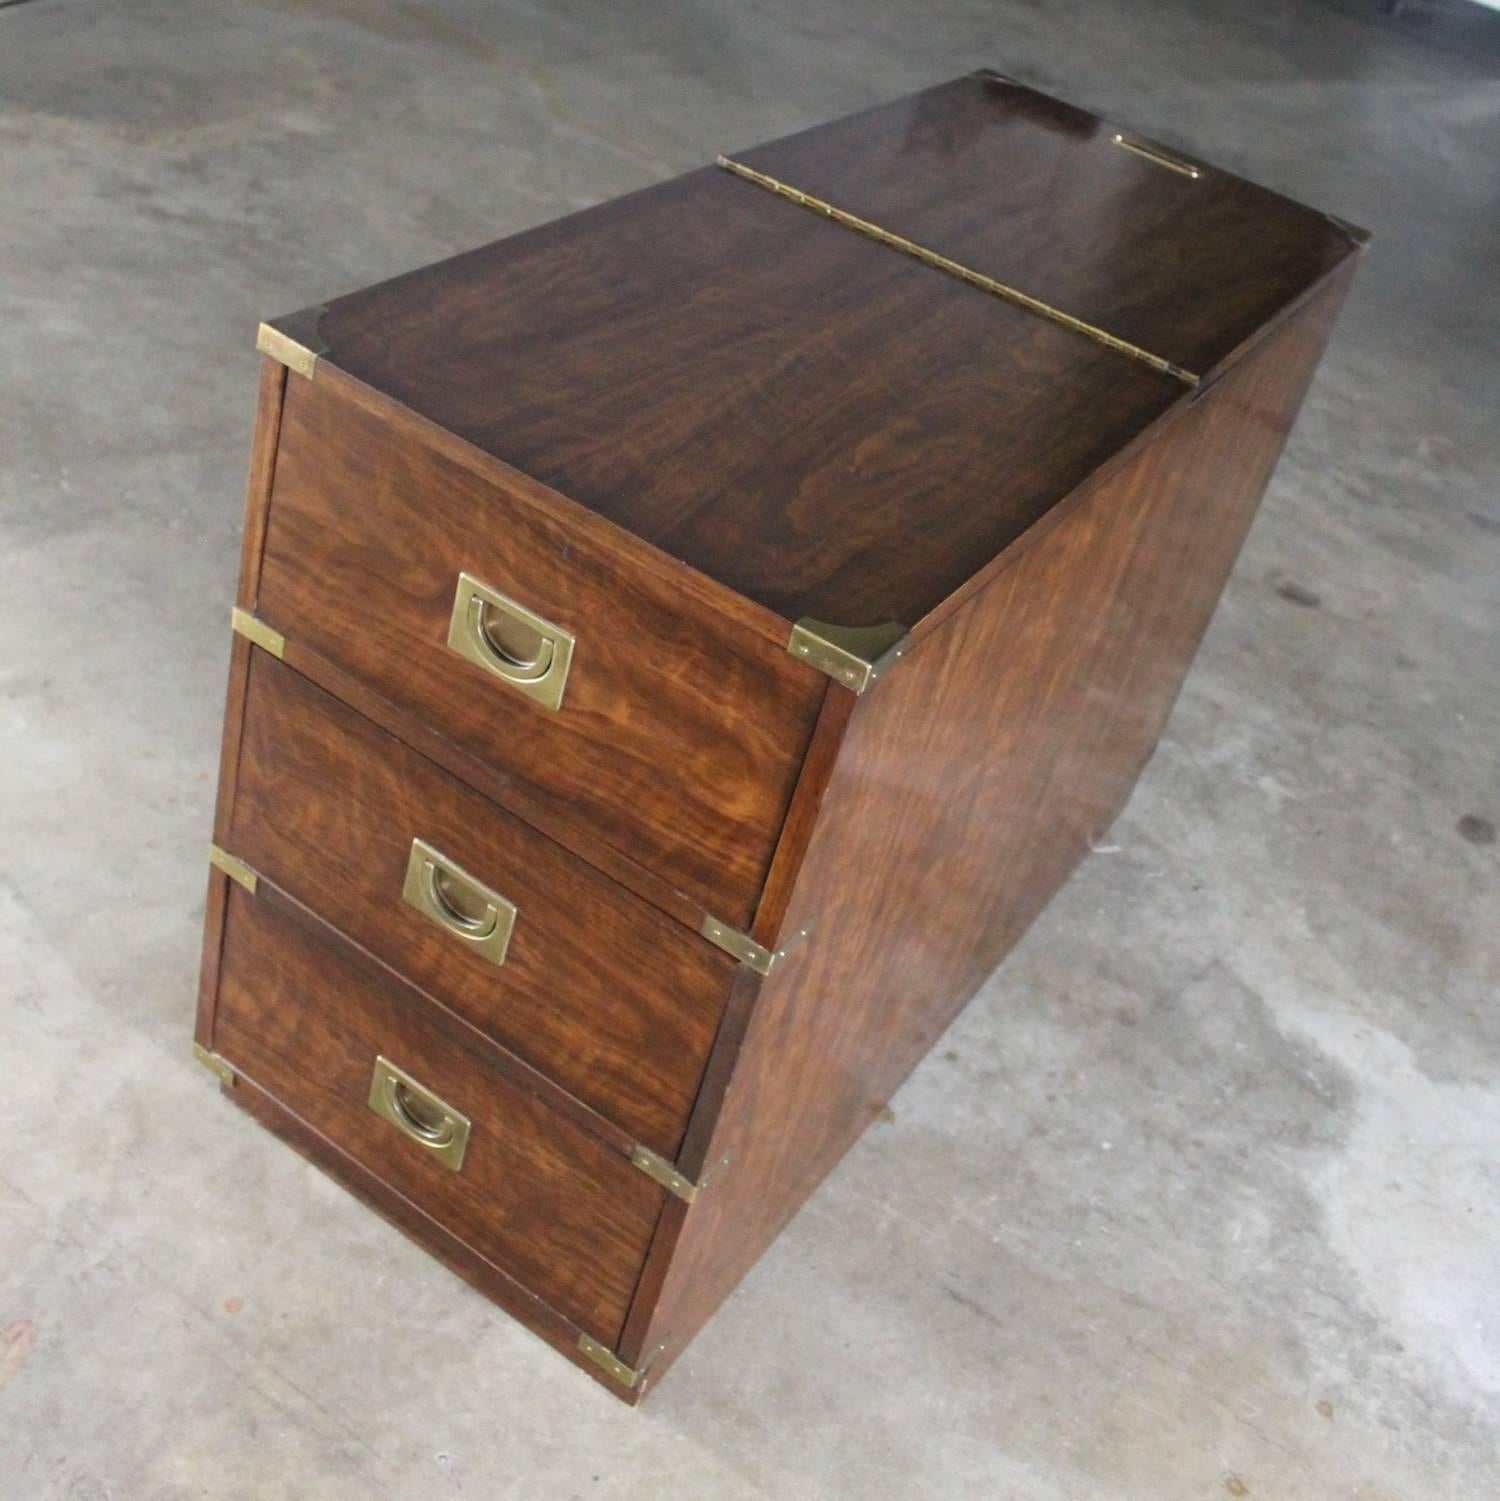 Unique and interesting Campaign style chest type dry bar by Drexel with flip-top and three drawers. In fabulous vintage Mid-Century condition, circa 1980.

This is quite the handsome and unique dry bar. Made by Drexel, circa 1980s in the ever so